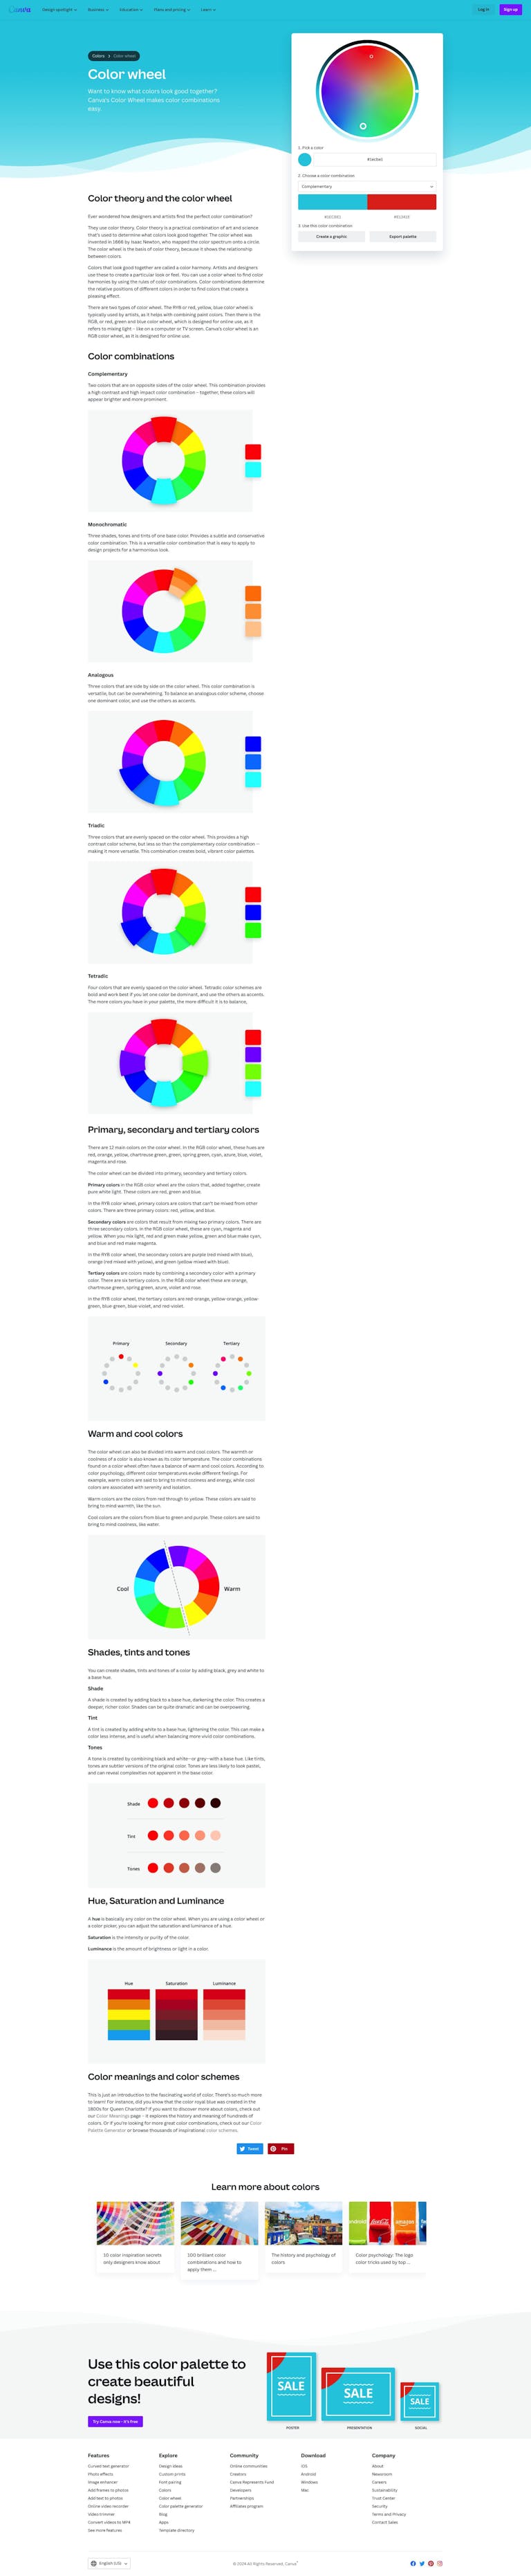 Screenshot of Color Wheel by Canva